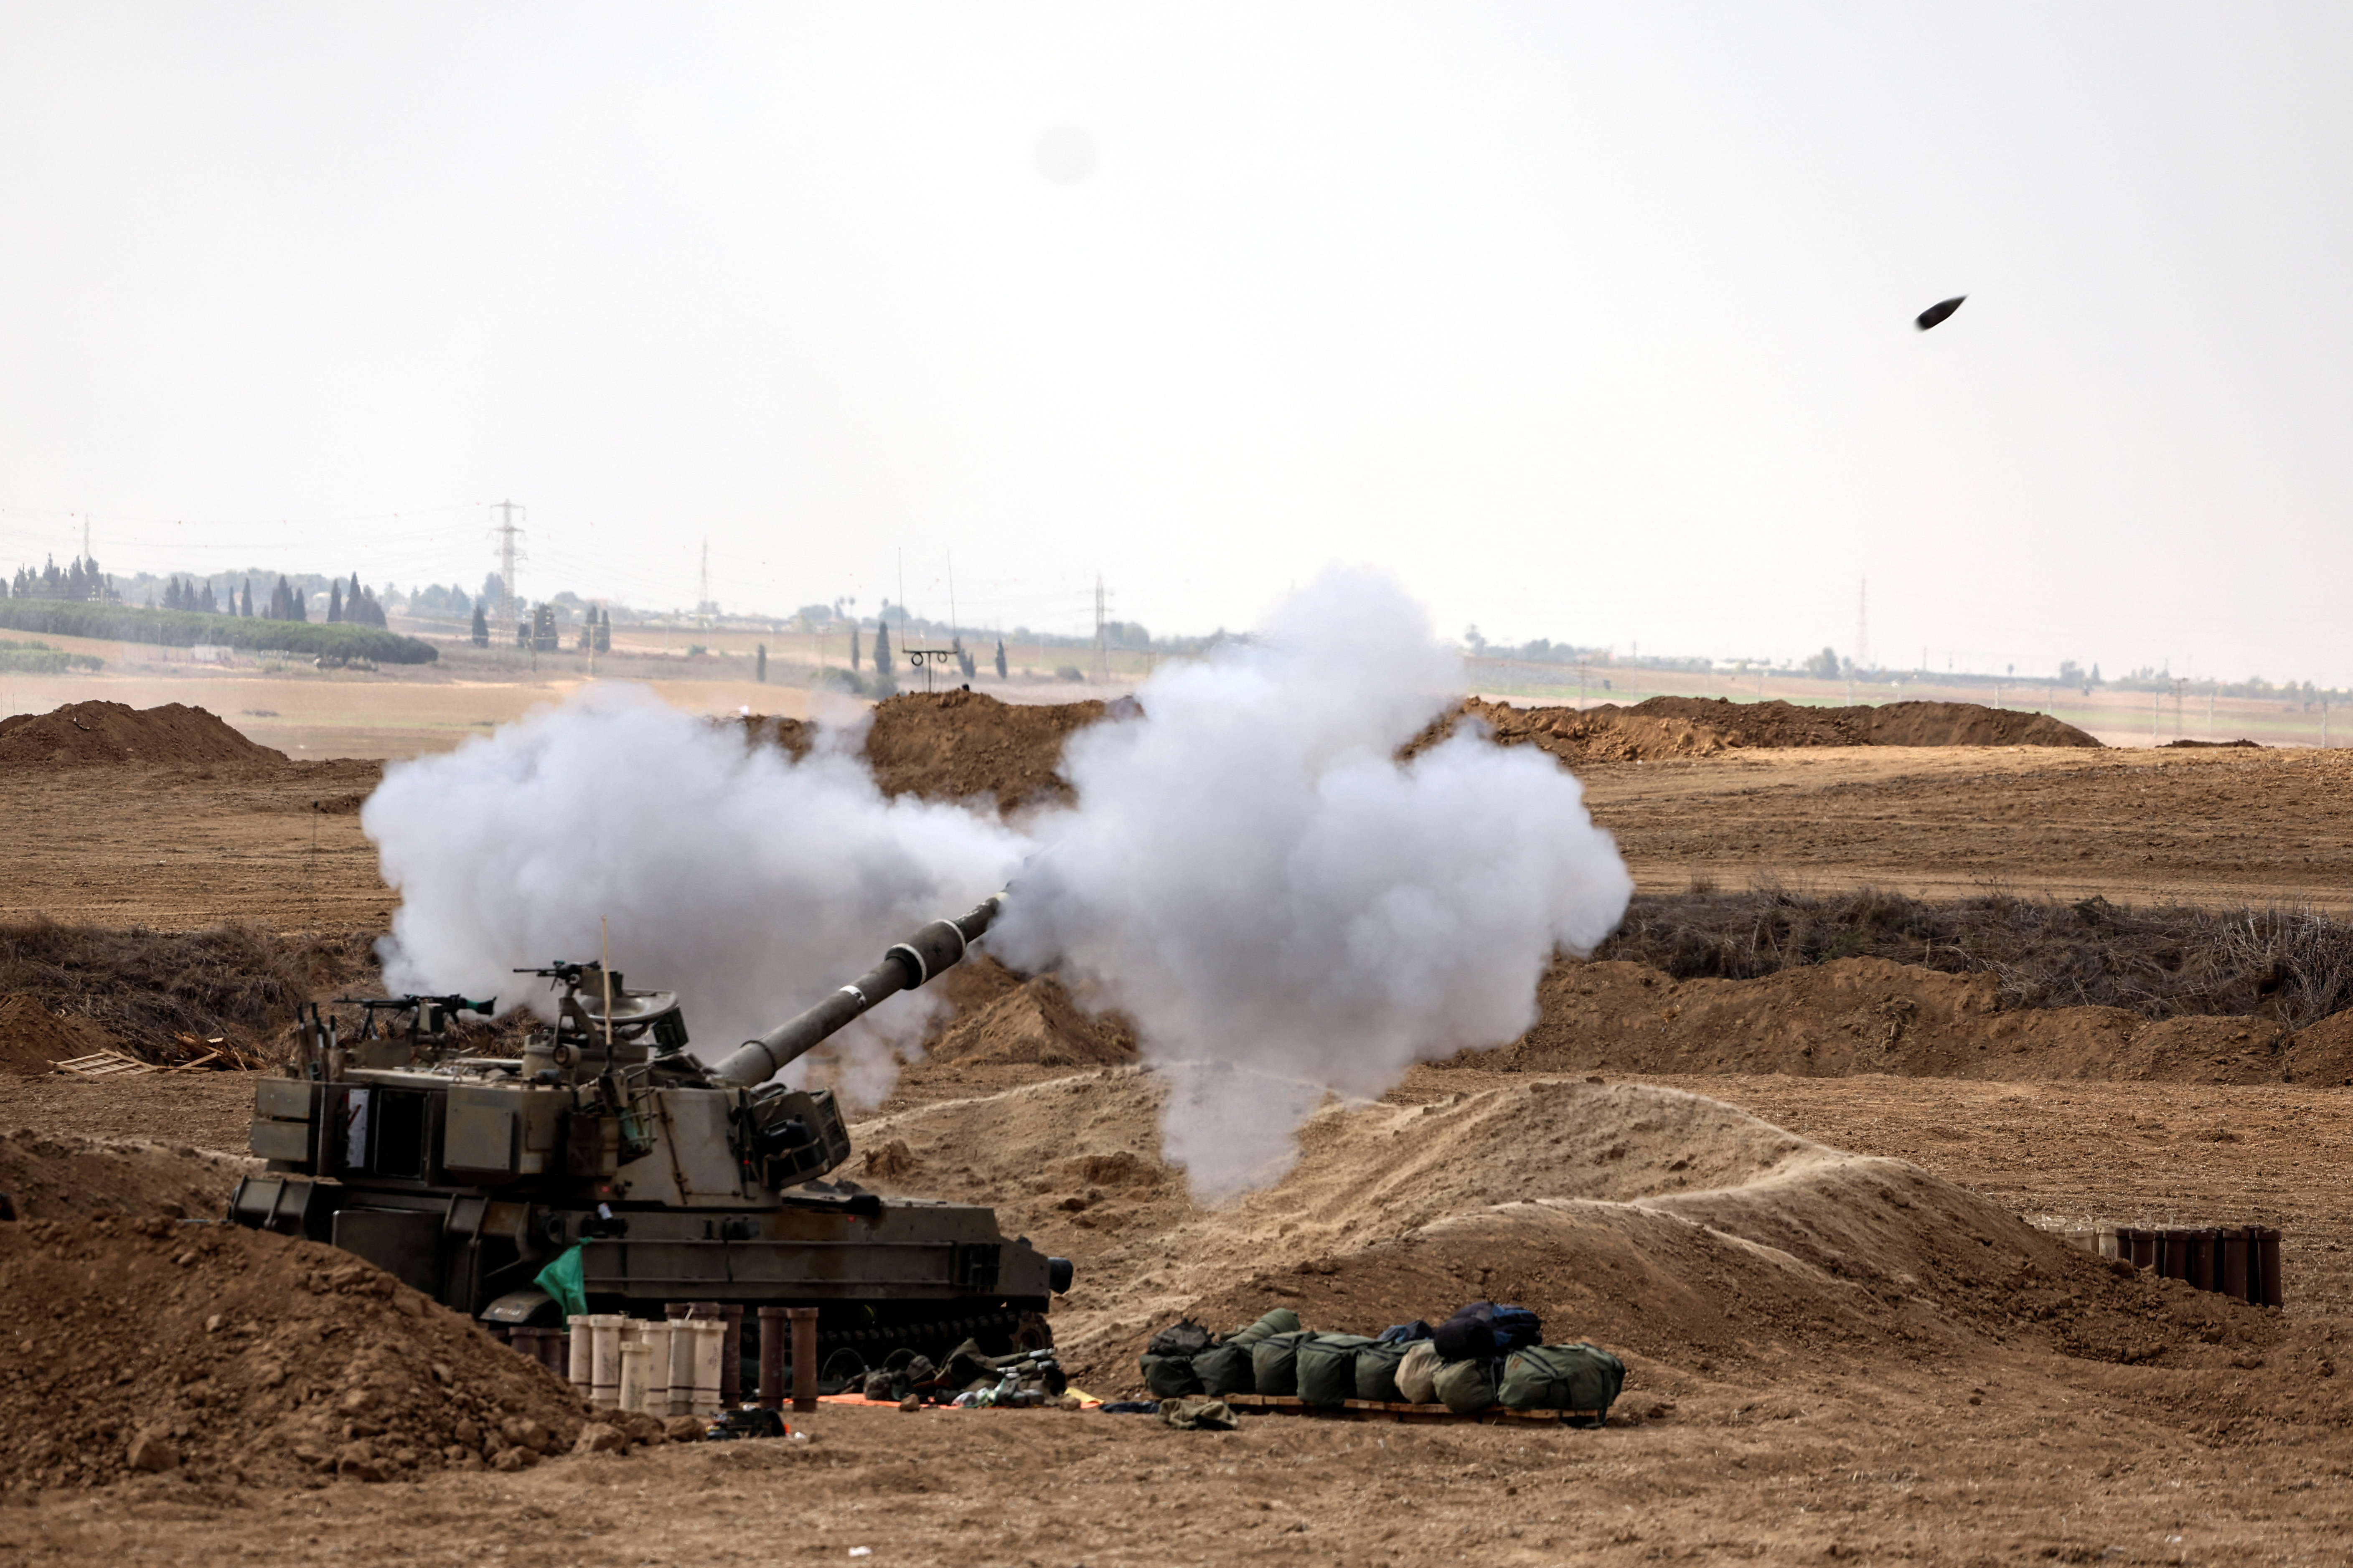 An Israeli tank fires near Israel's border with the Gaza Strip, in southern Israel